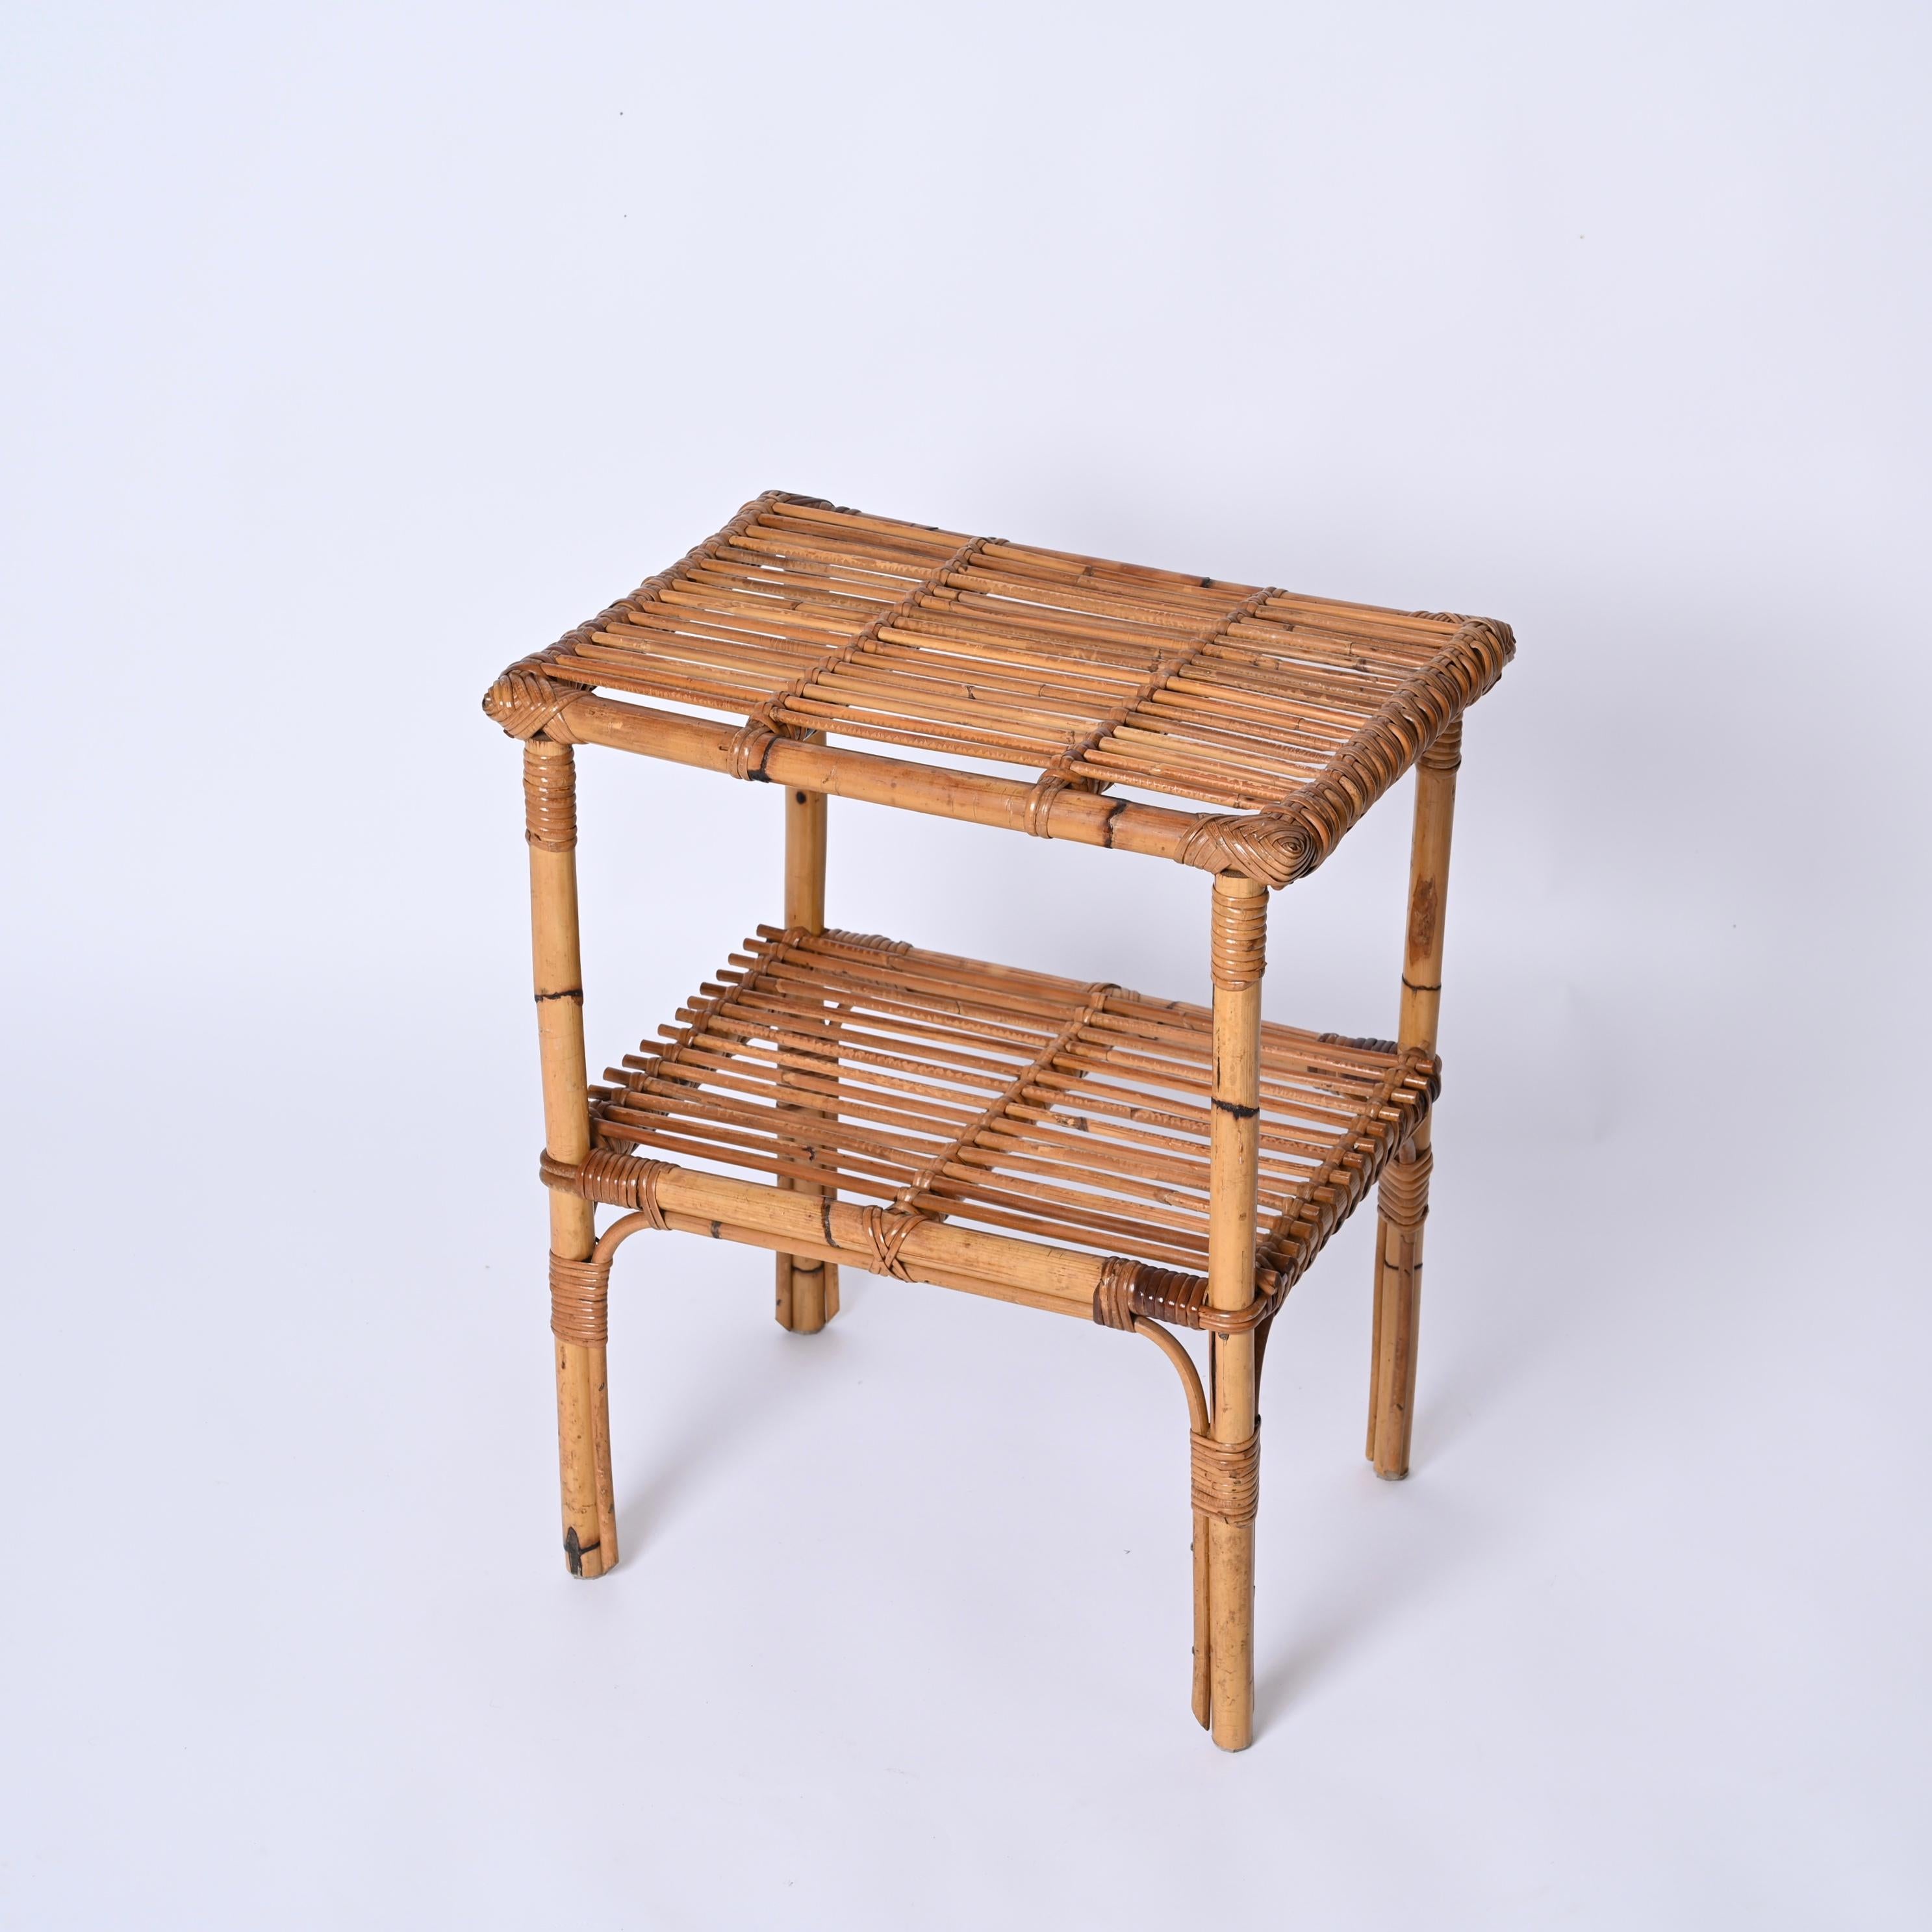 Hand-Woven Midcentury Italian Coffee Table in Bamboo and Rattan, Italy 1960s For Sale